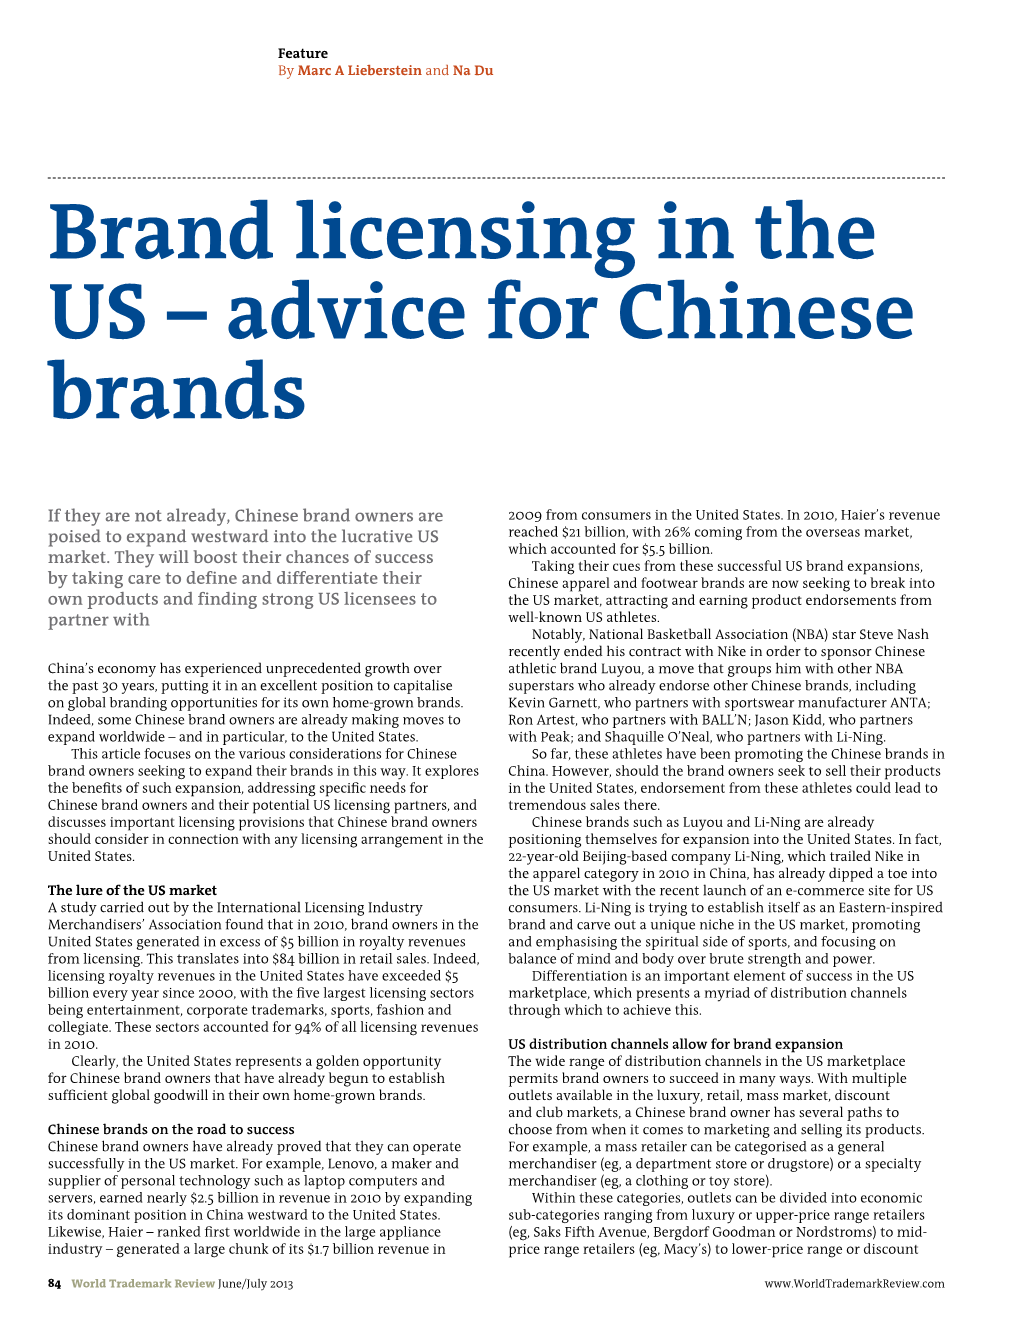 Brand Licensing in the US – Advice for Chinese Brands